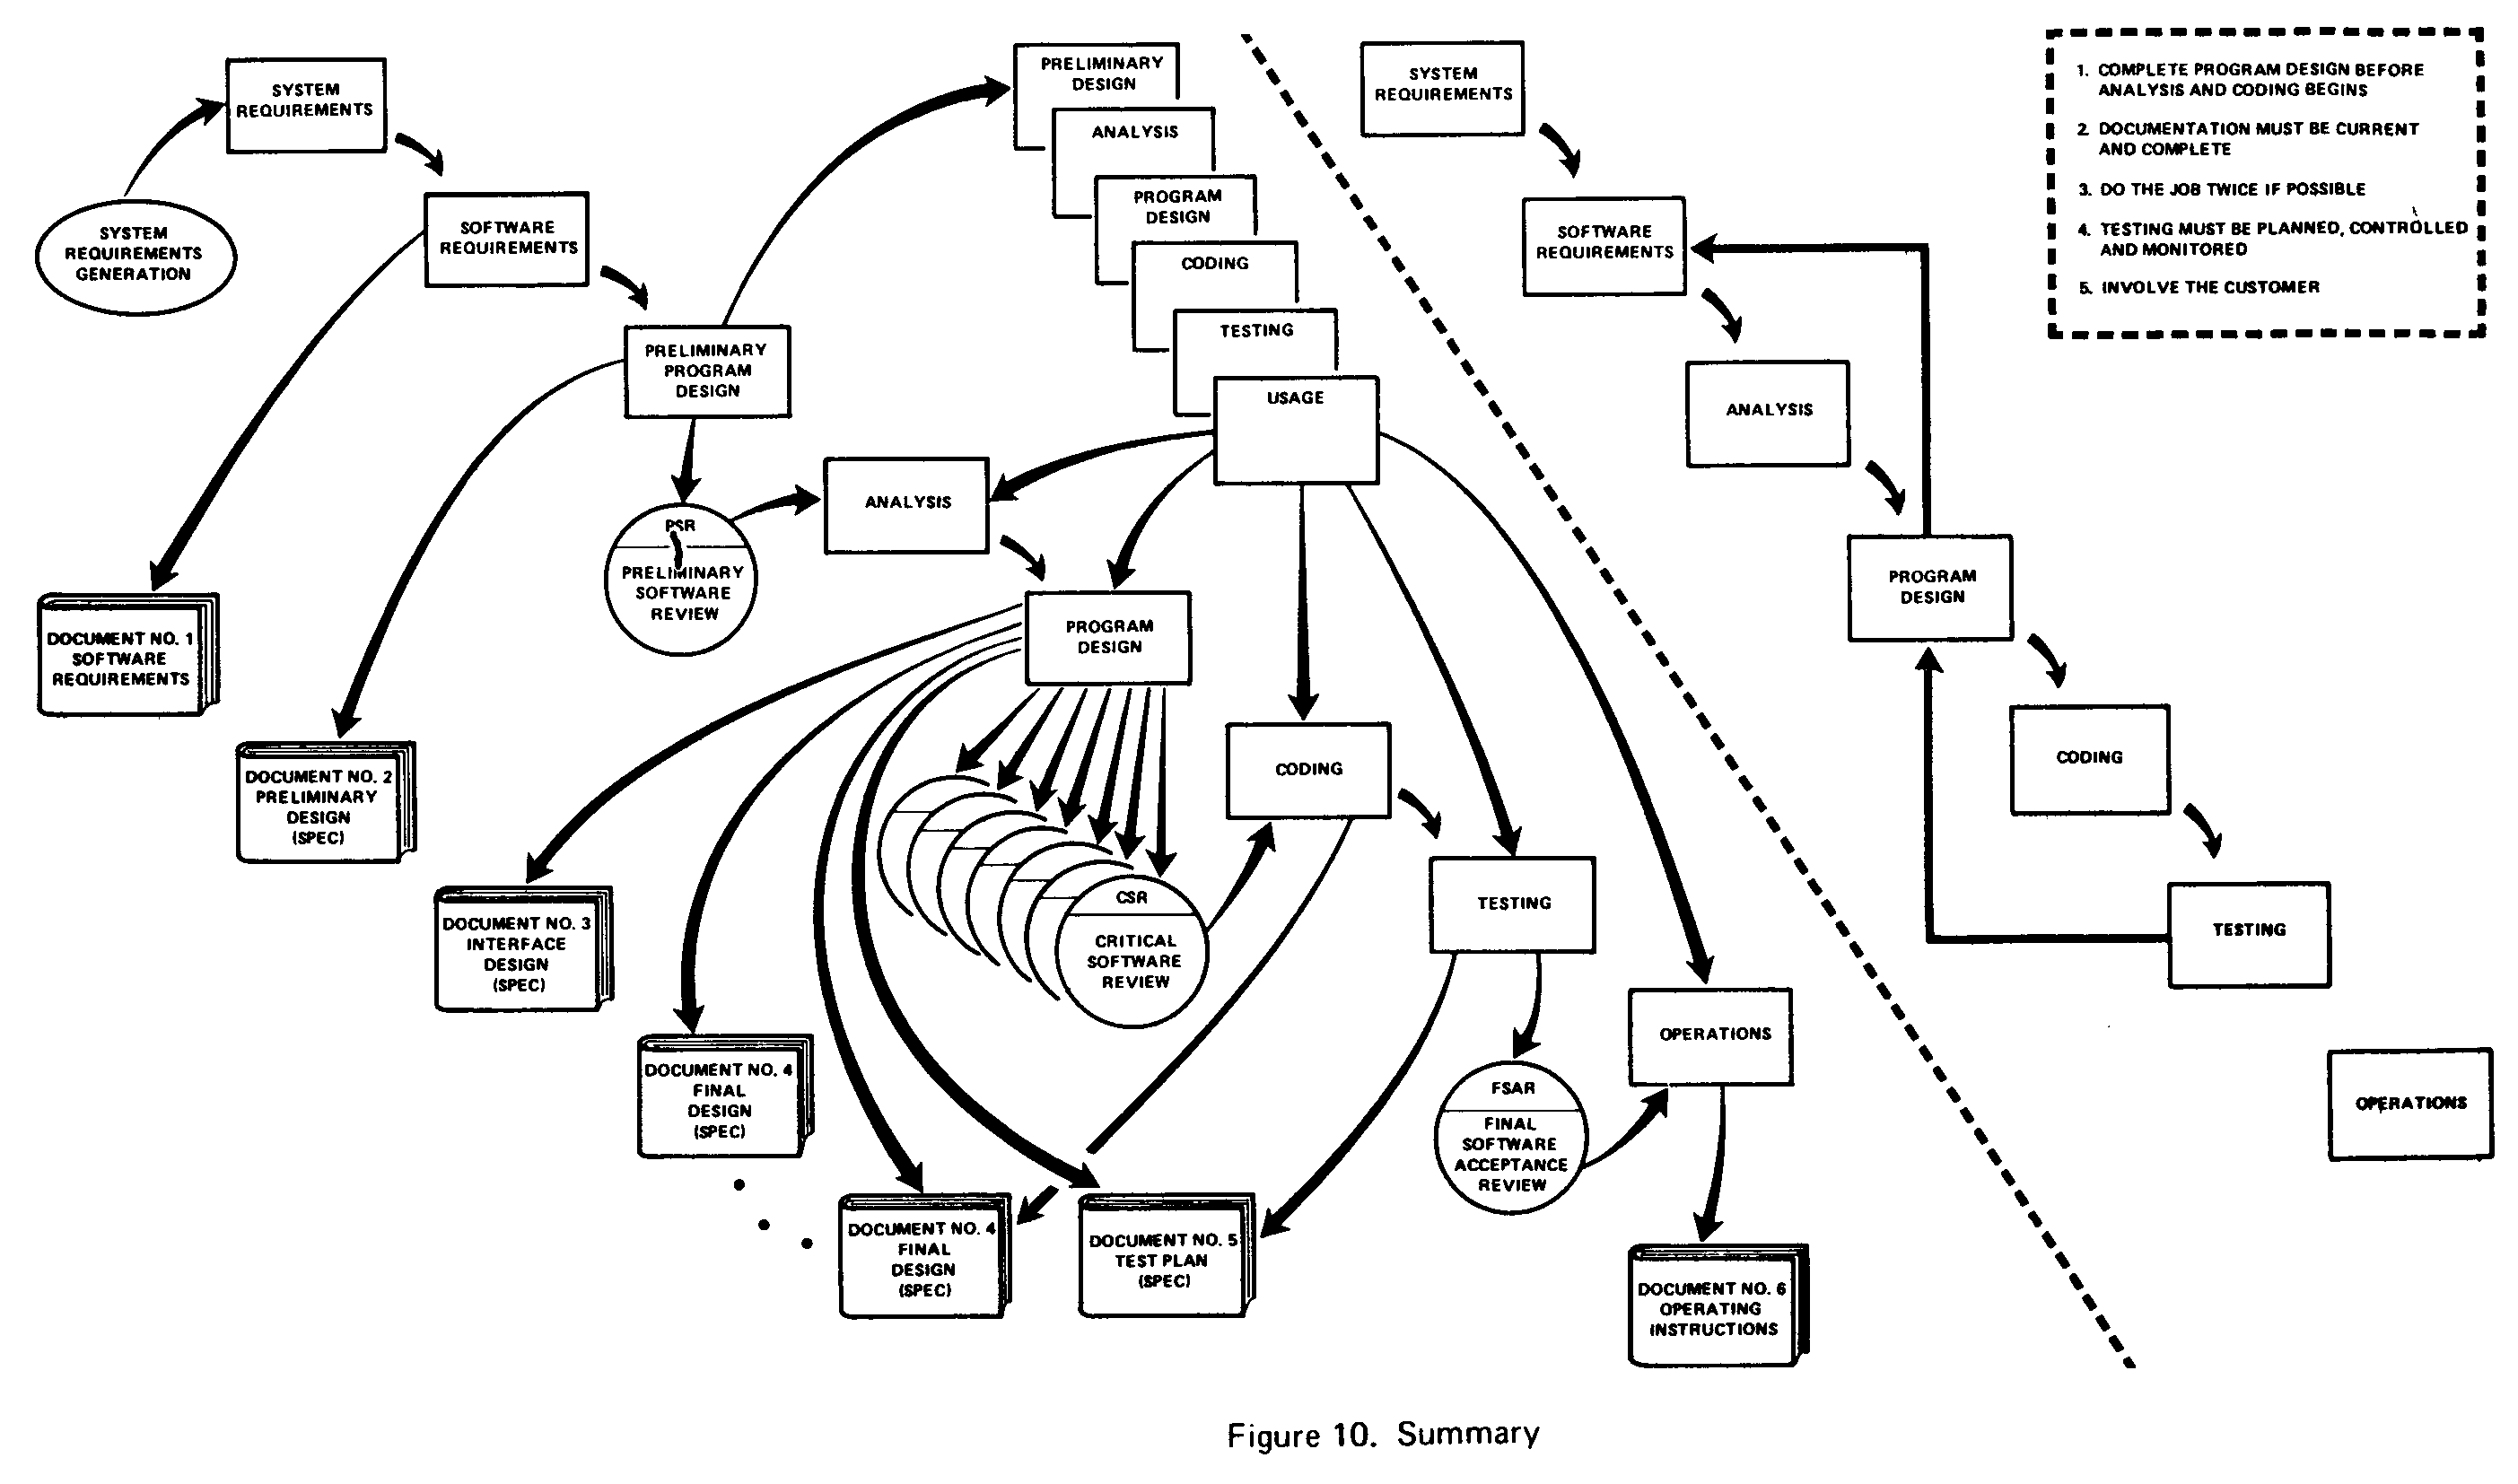 Royce 1970 - Managing the development of large software systems: concepts and techniques